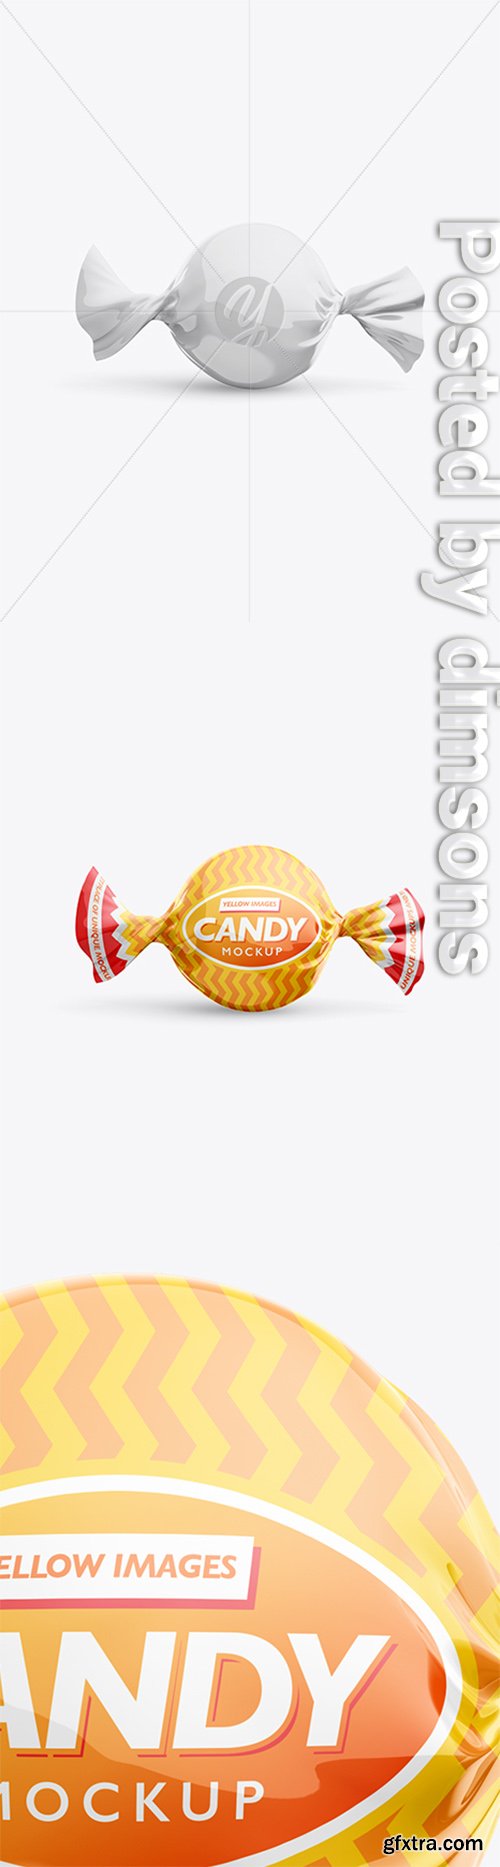 Candy Mockup - Front View 25828